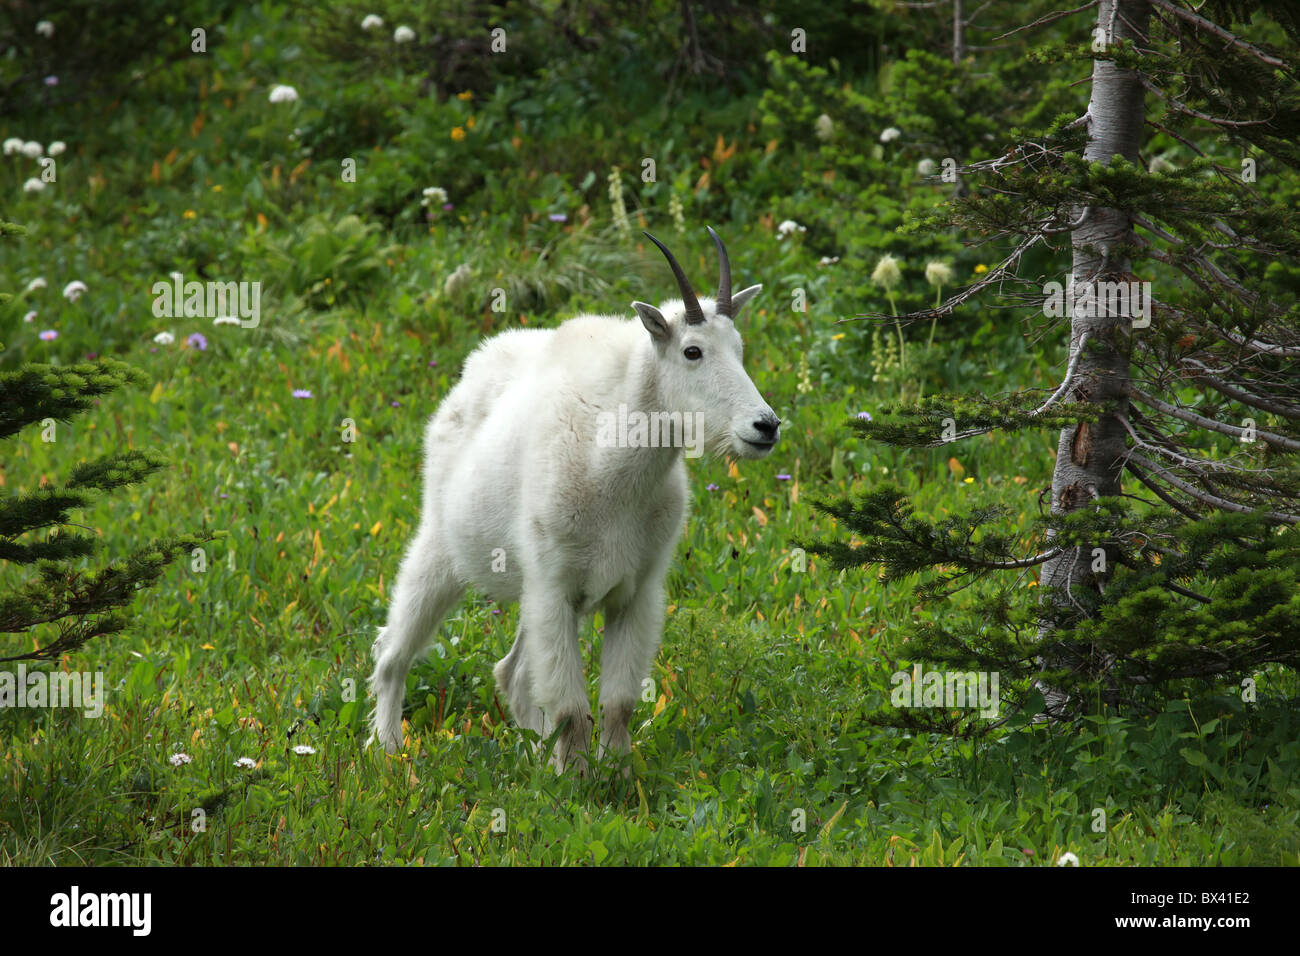 Mature mountain billy goat with horns walking in a green meadow with pine trees at Glacier National Park, Montana, USA Stock Photo